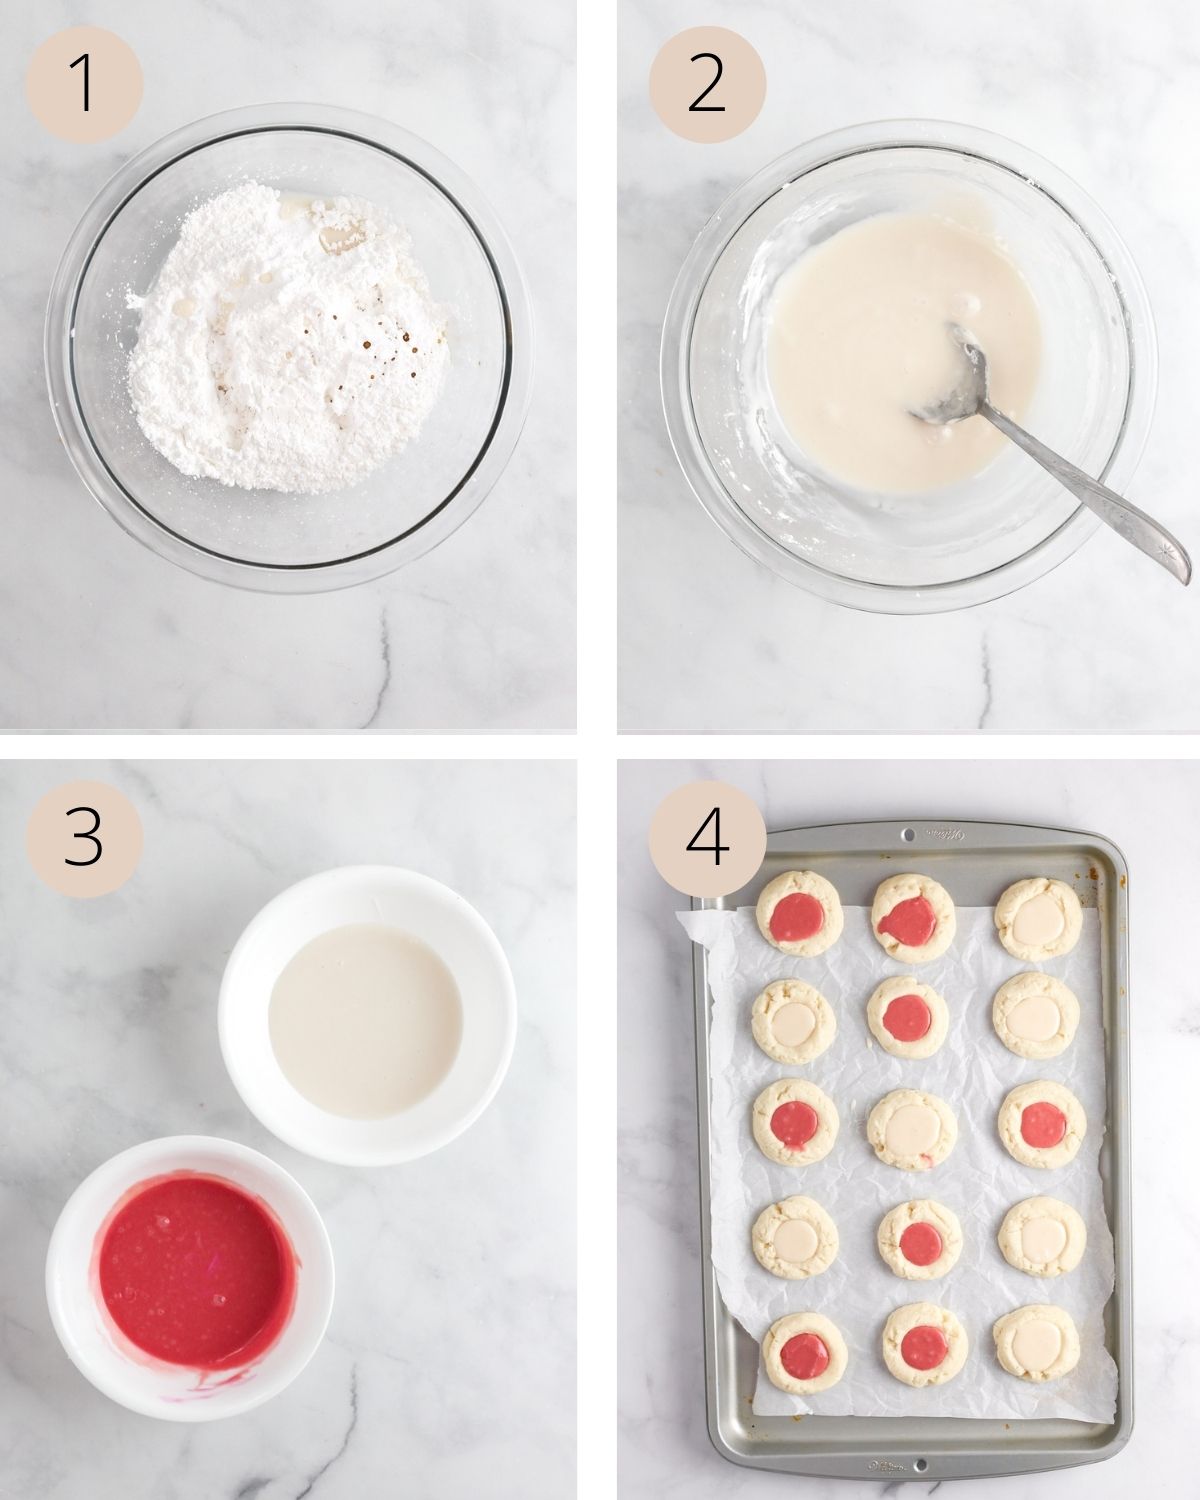 a collage of four images, showing how to mix the icing, color the icing in separate bowls, and add the icing into the center of the baked thumbprint cookies.